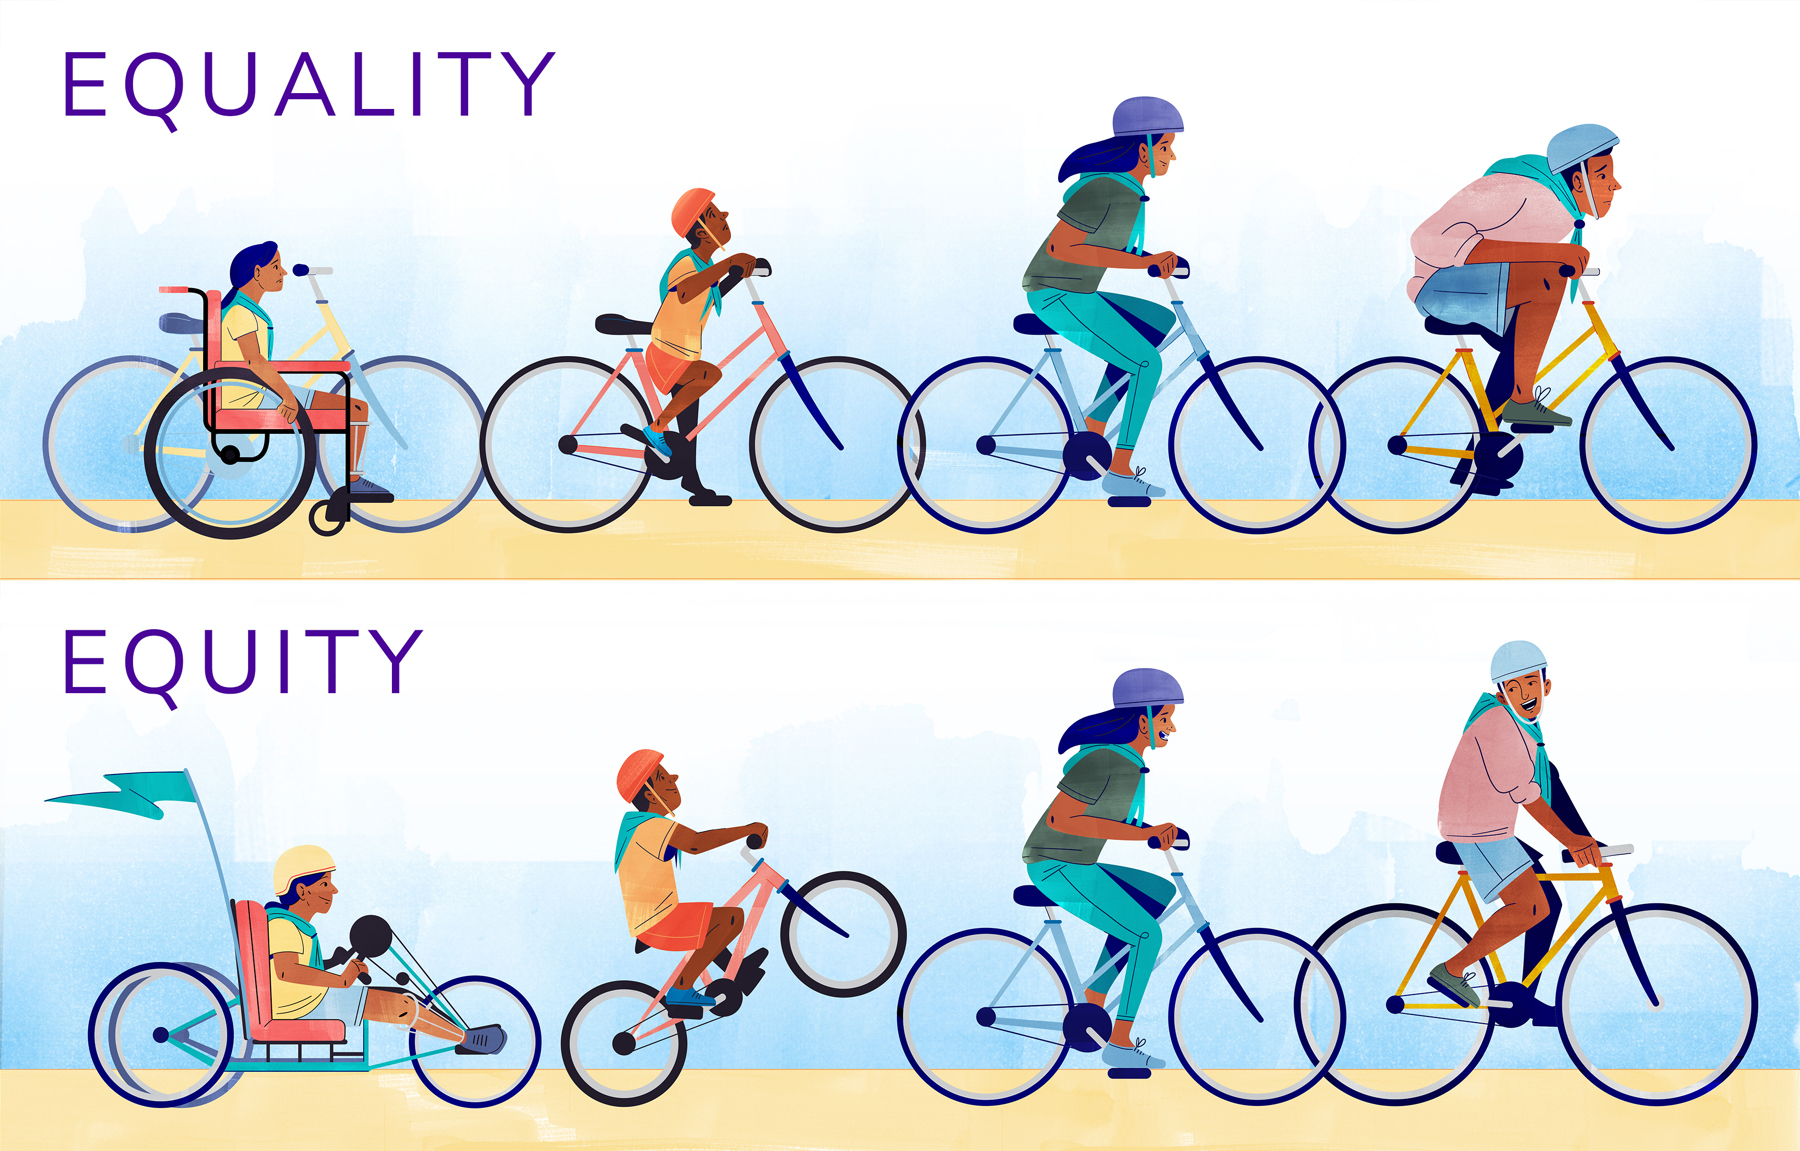 Graphic showing the difference between equity and equality. For equality everybody is given the same bike, and for equity everybody is given a bike that is adapted to their needs.